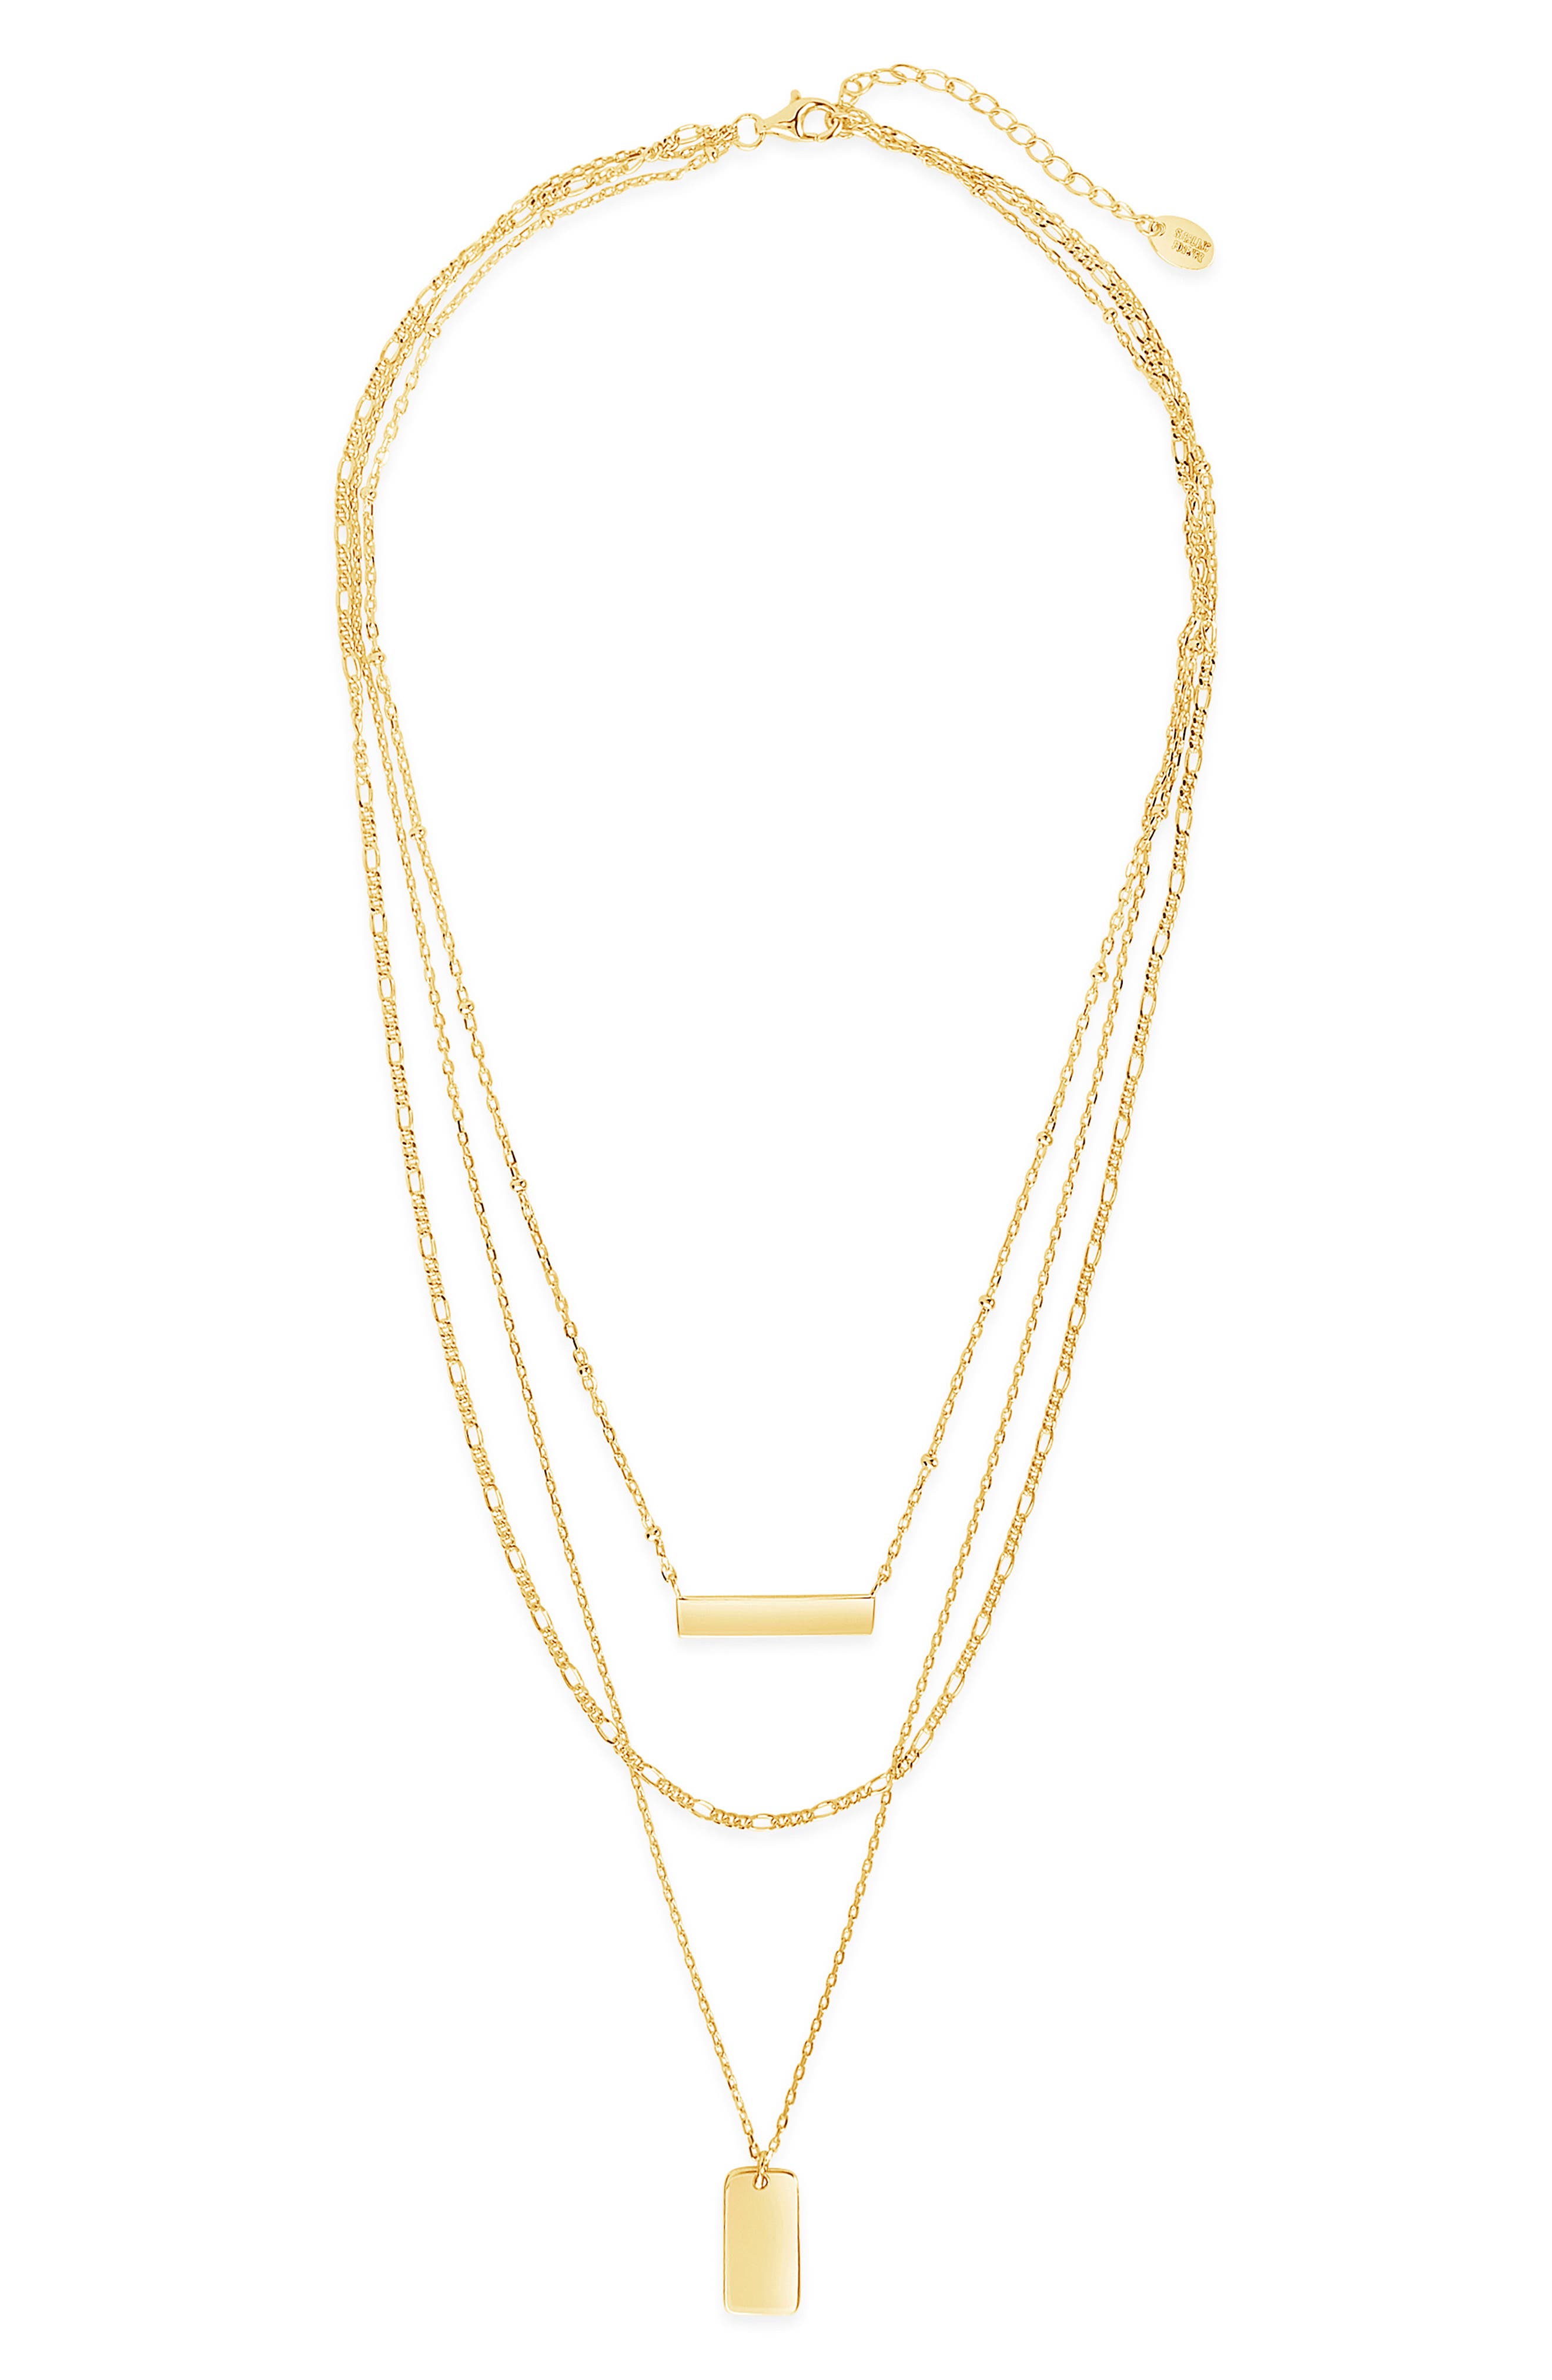 Multi Strand Necklace Gold-Plated Layered Medallion Necklace Layered Gold Necklace 